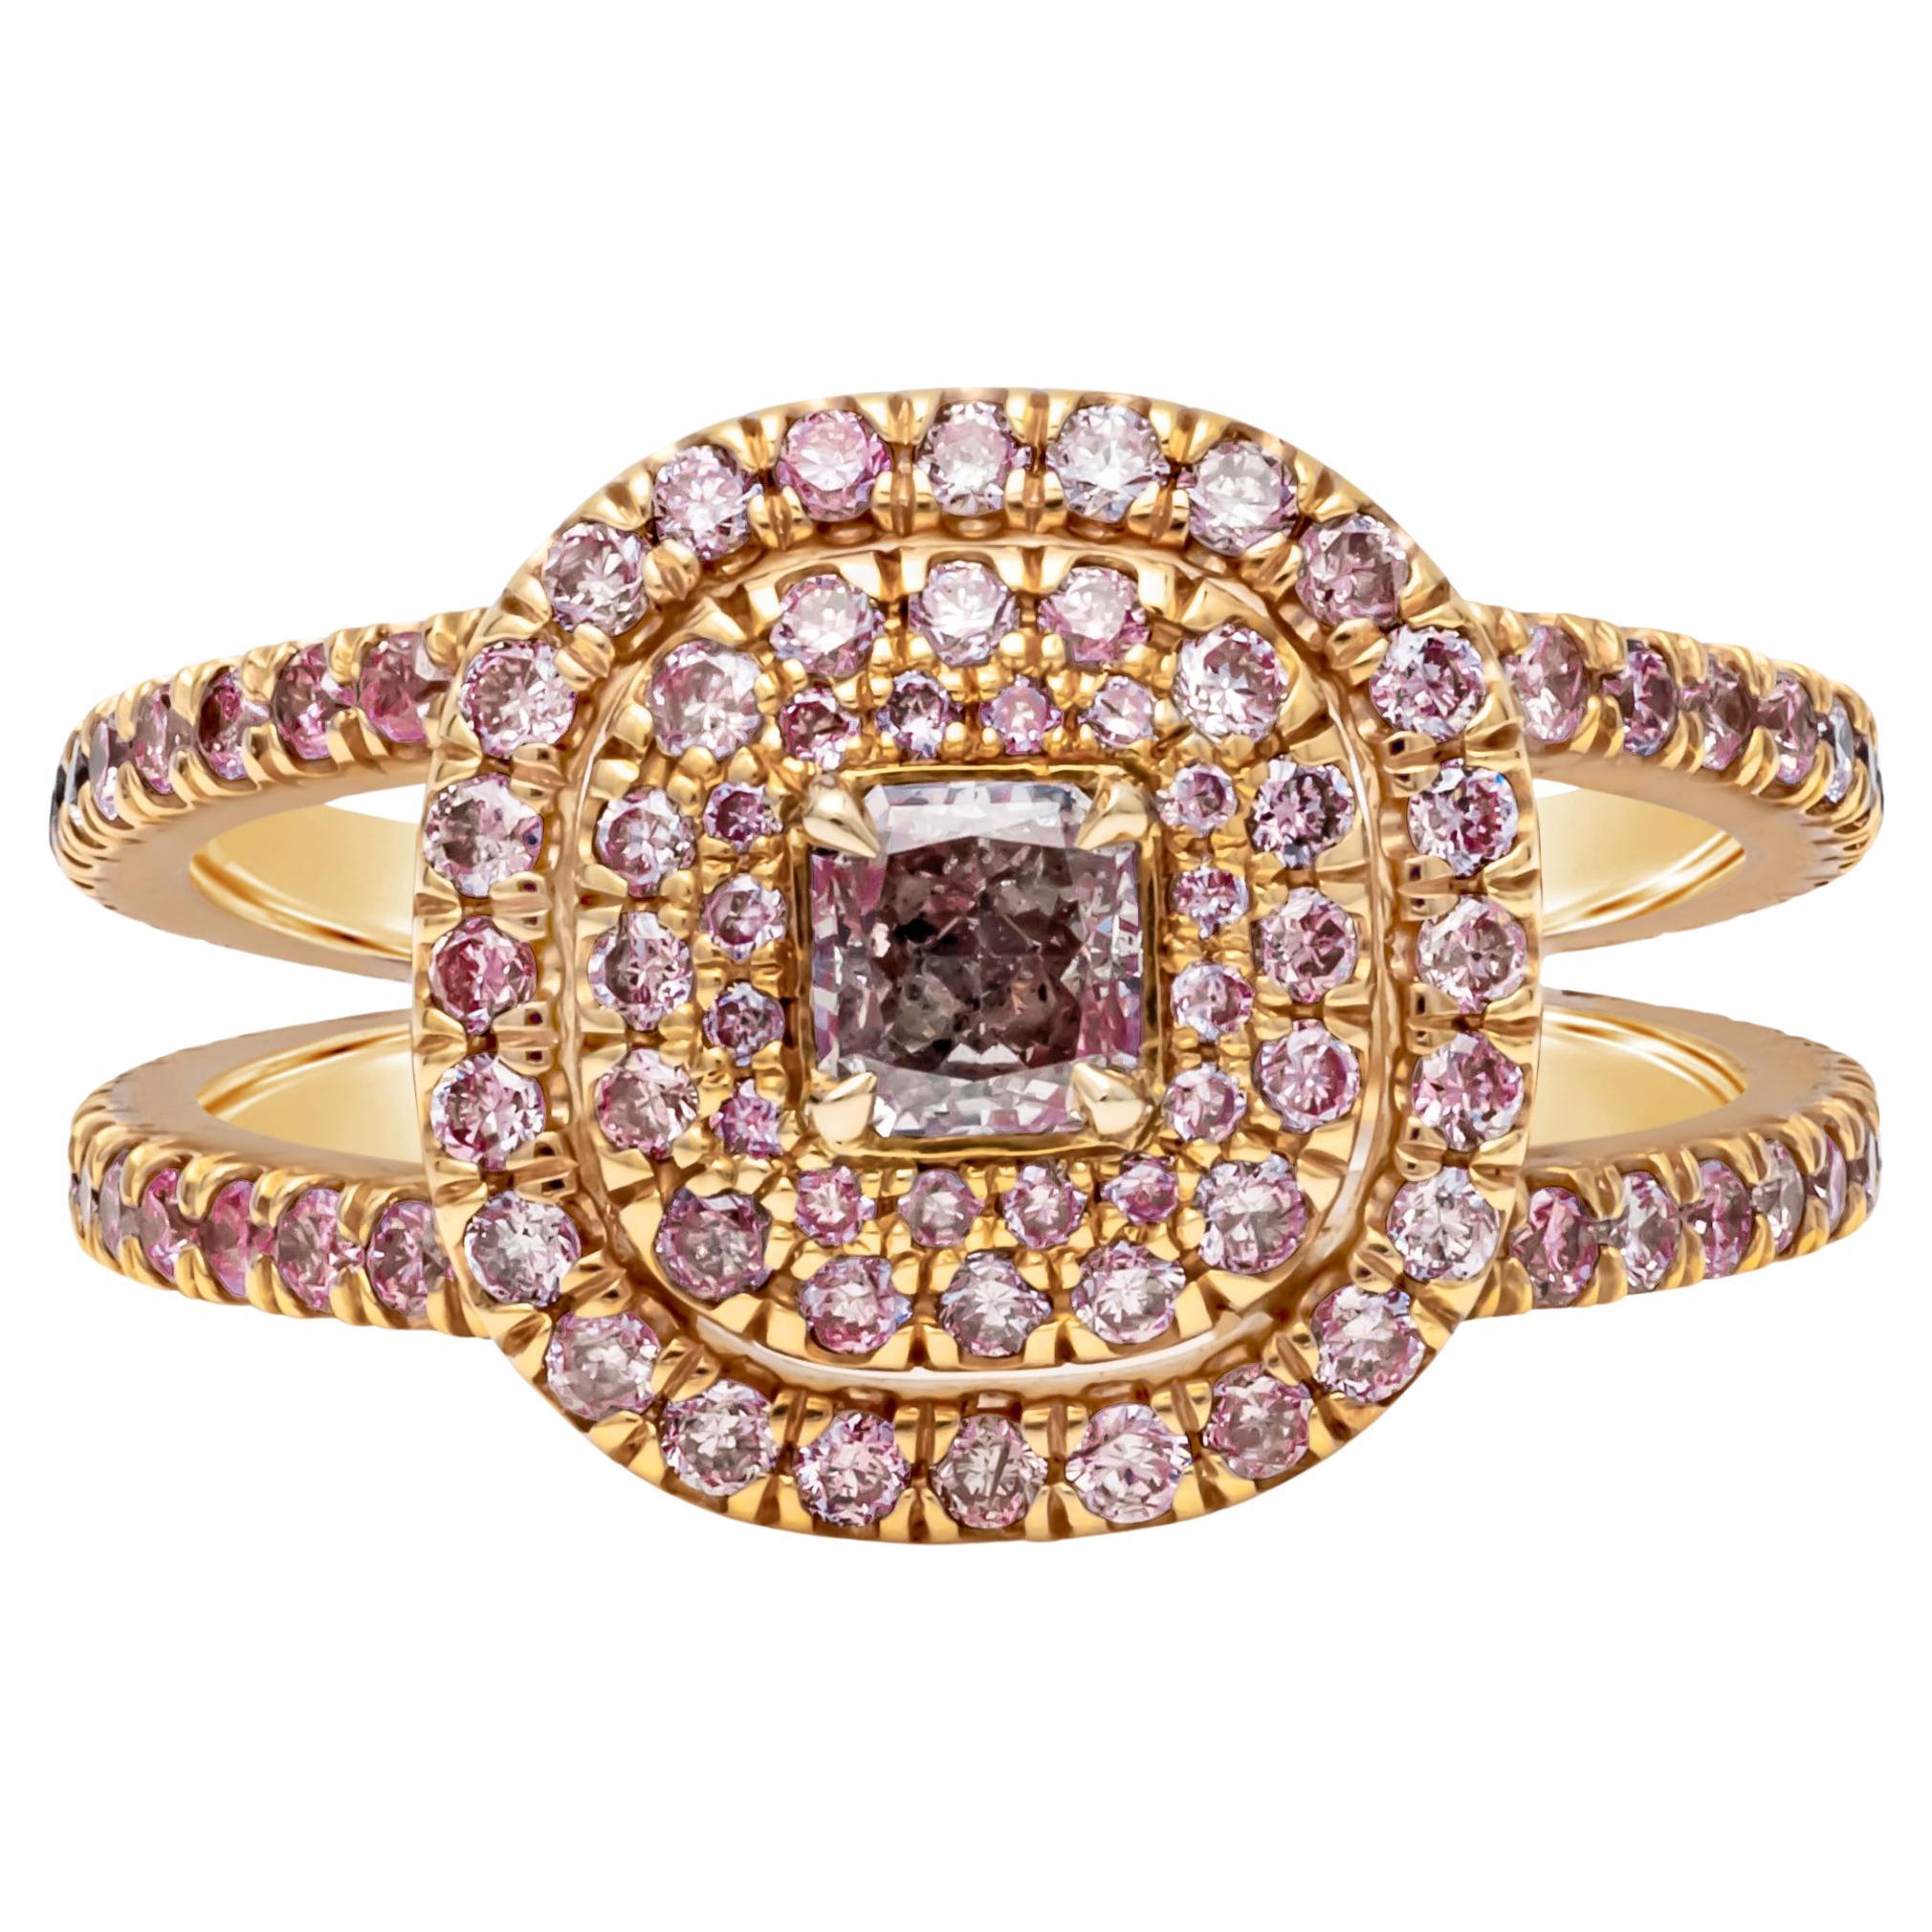 GIA Certified 0.31 Carats Radiant Cut Purple Pink Diamond Halo Engagement Ring